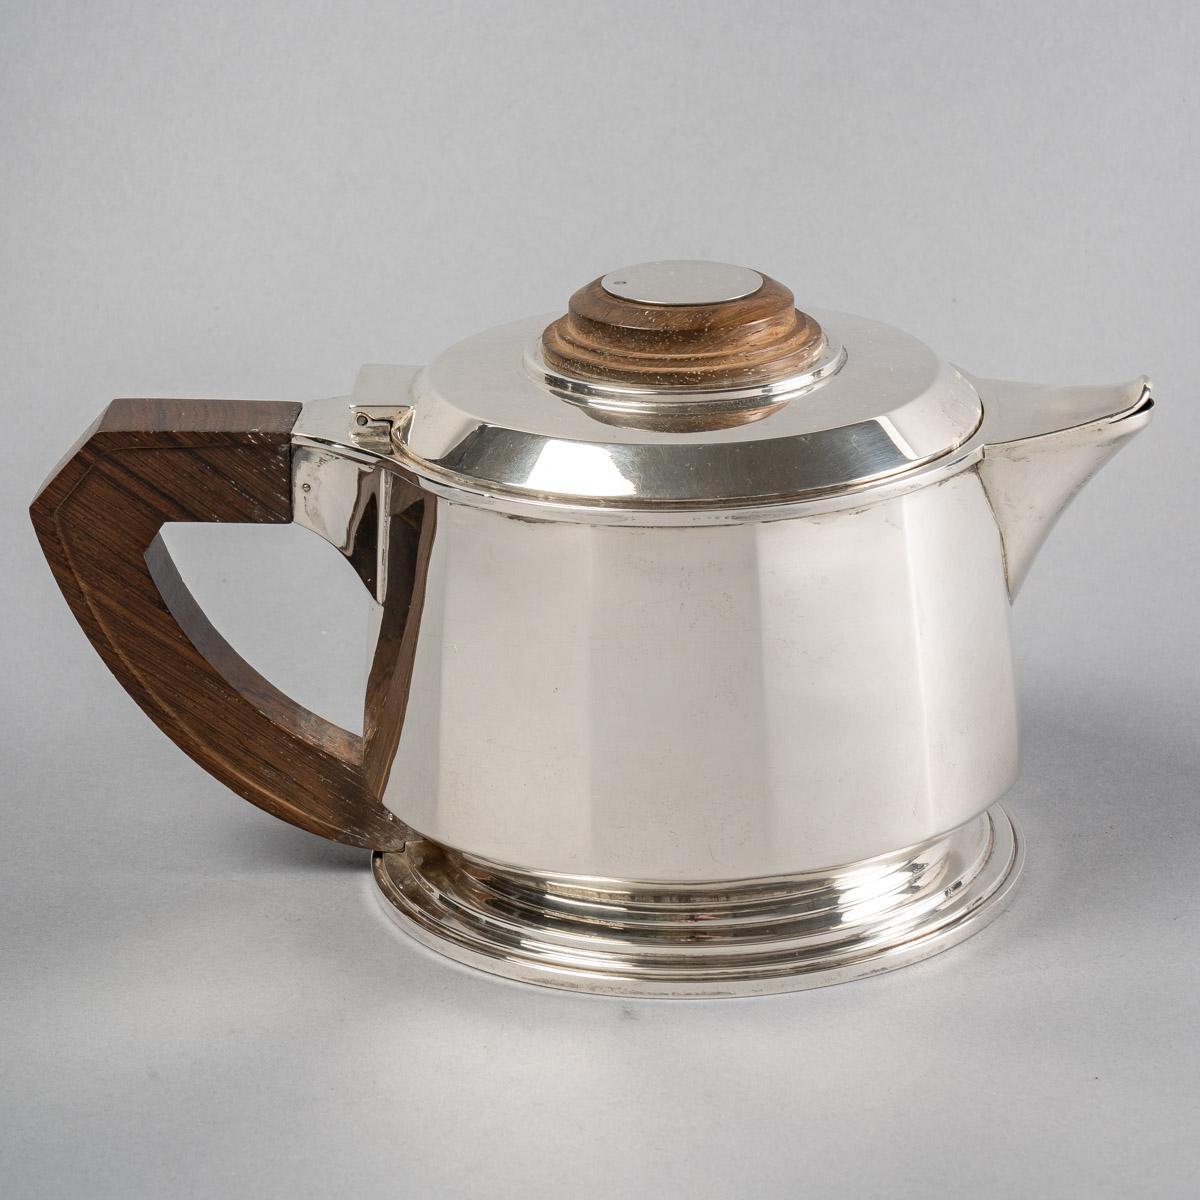 1925 Puiforcat, Tea and Coffee Service in Sterling Silver and Rosewood For Sale 1